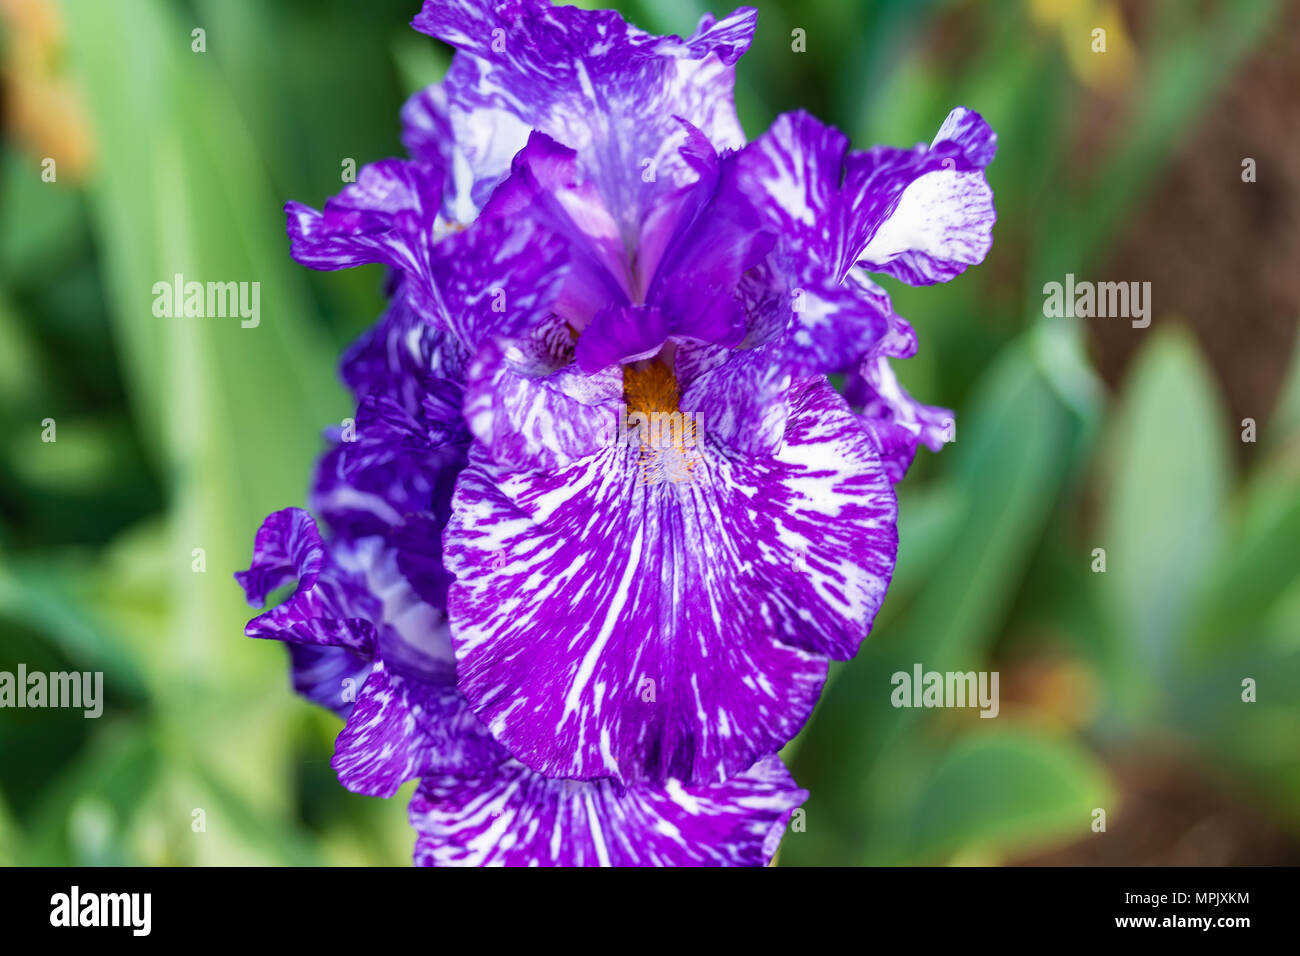 a violet bearded iris blossom in the spring morning light Stock Photo